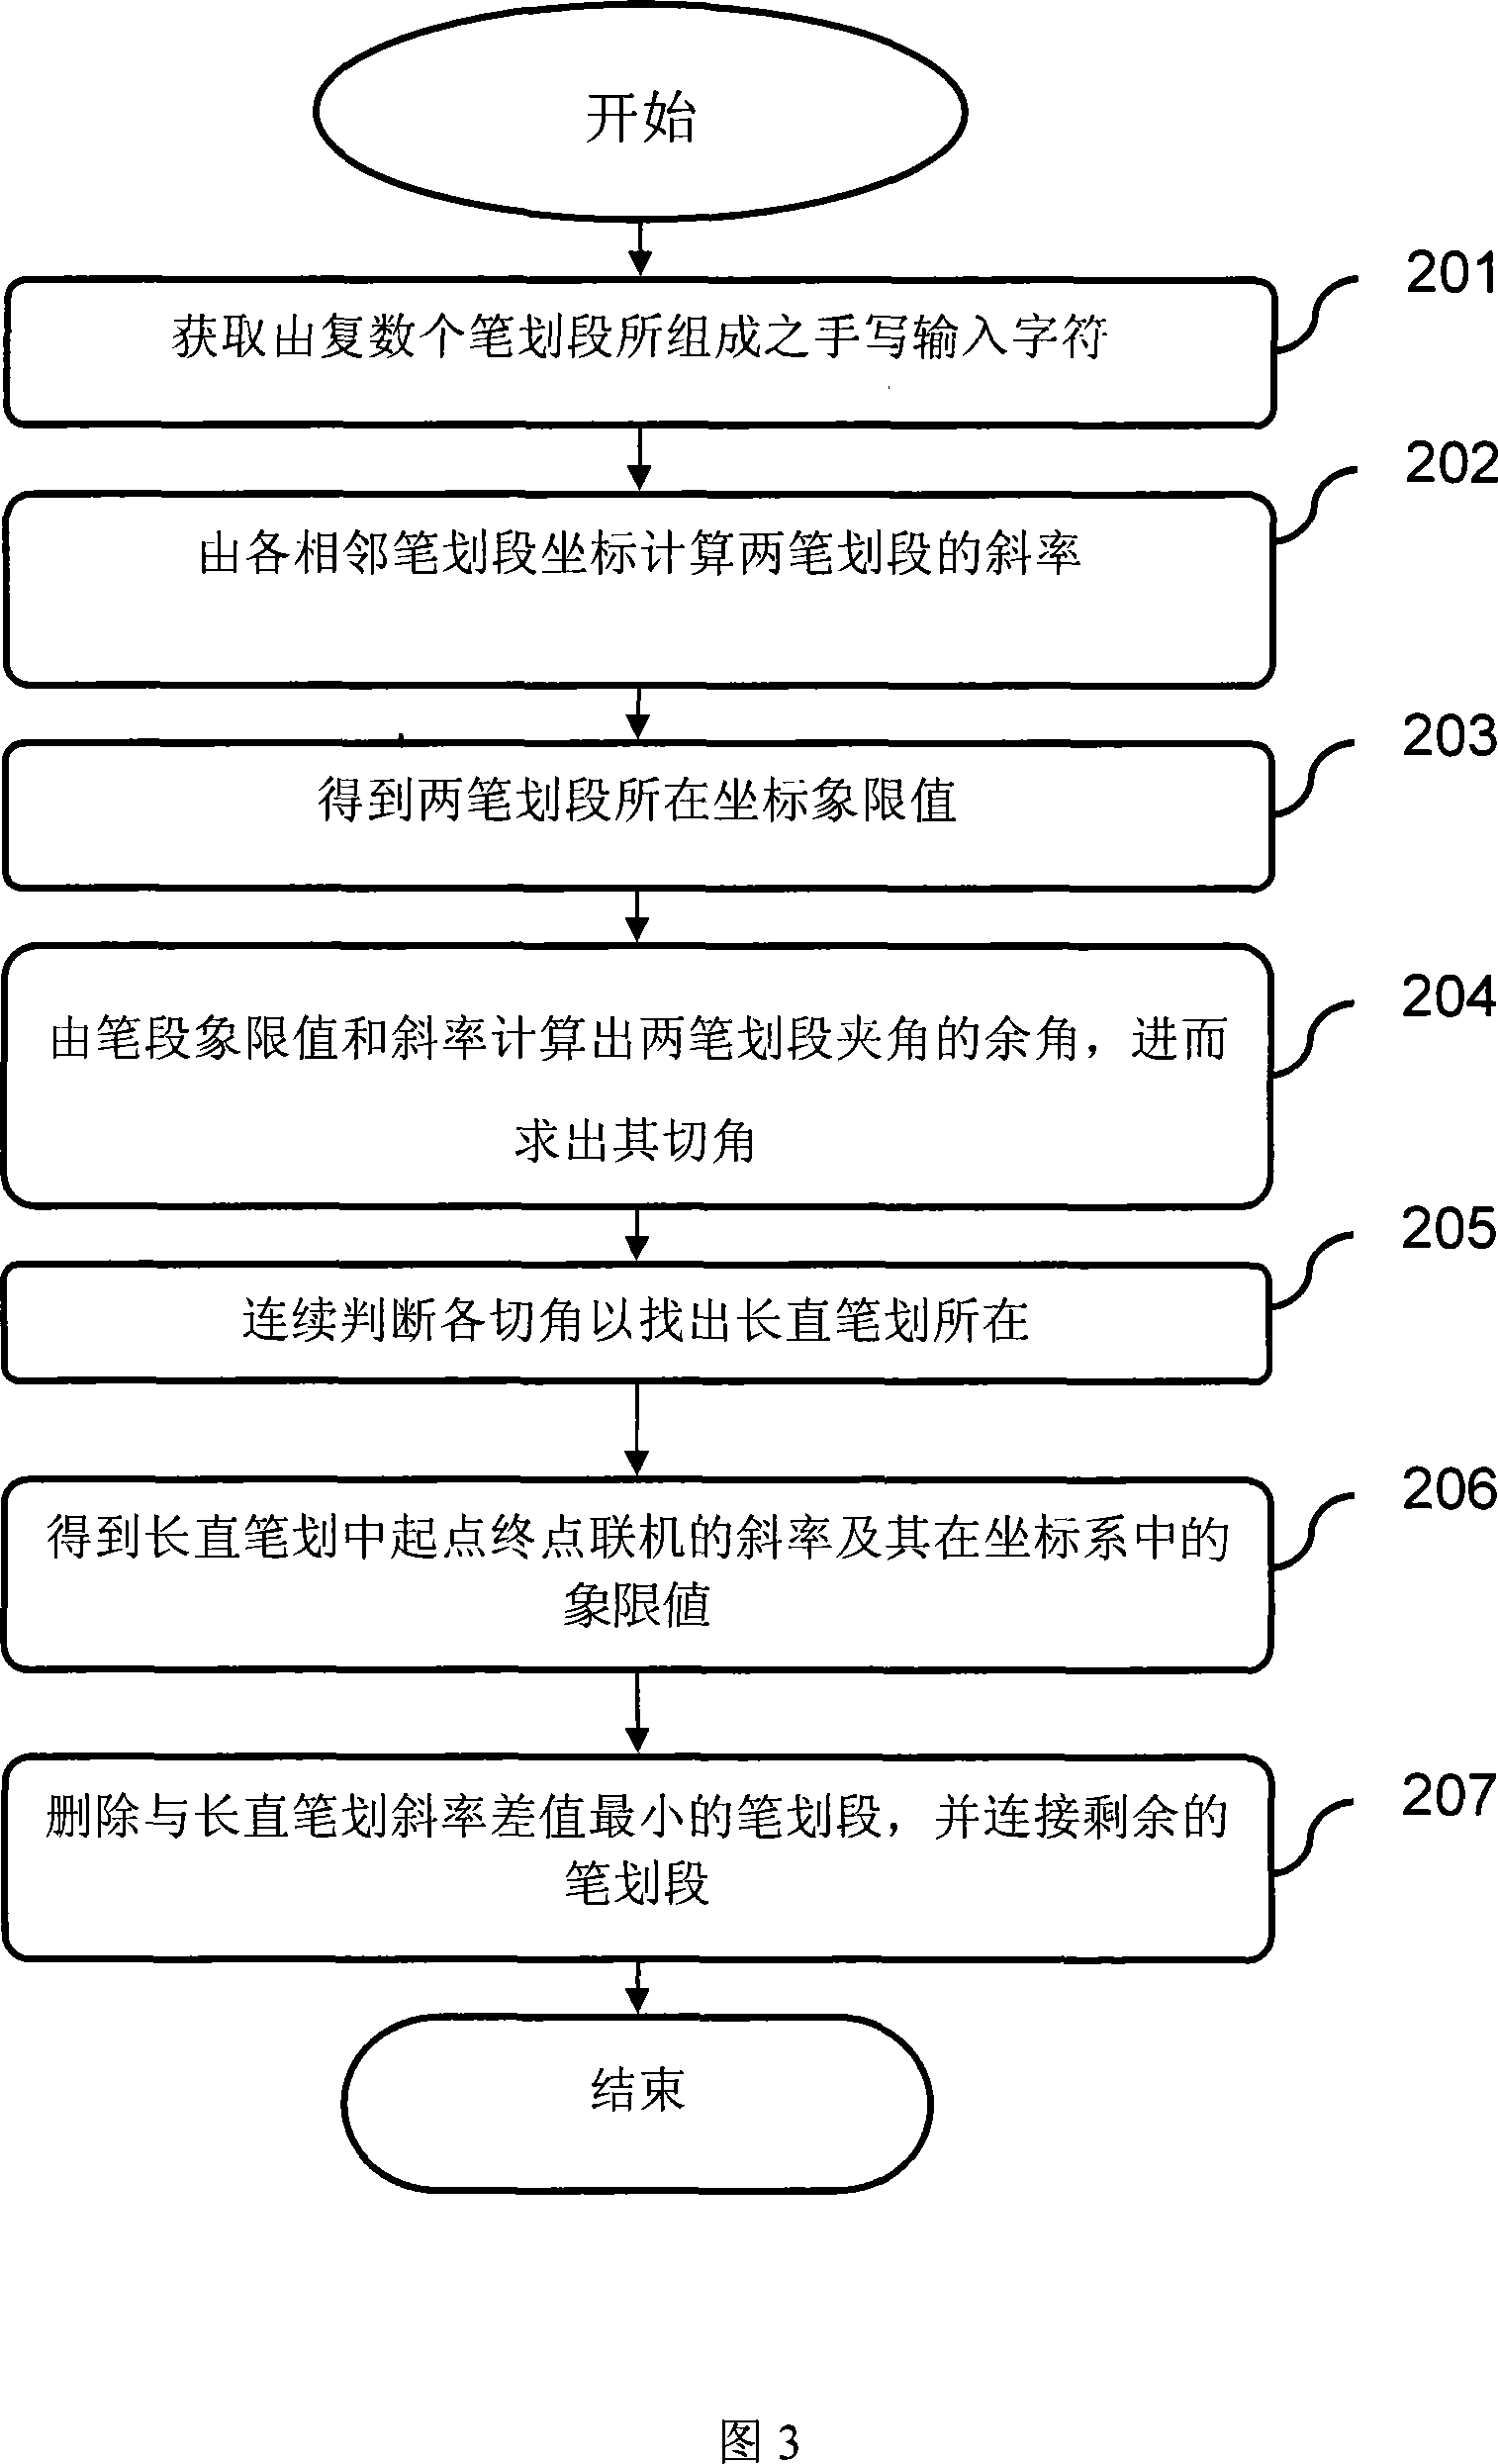 Method and system for discriminating handwriting characters